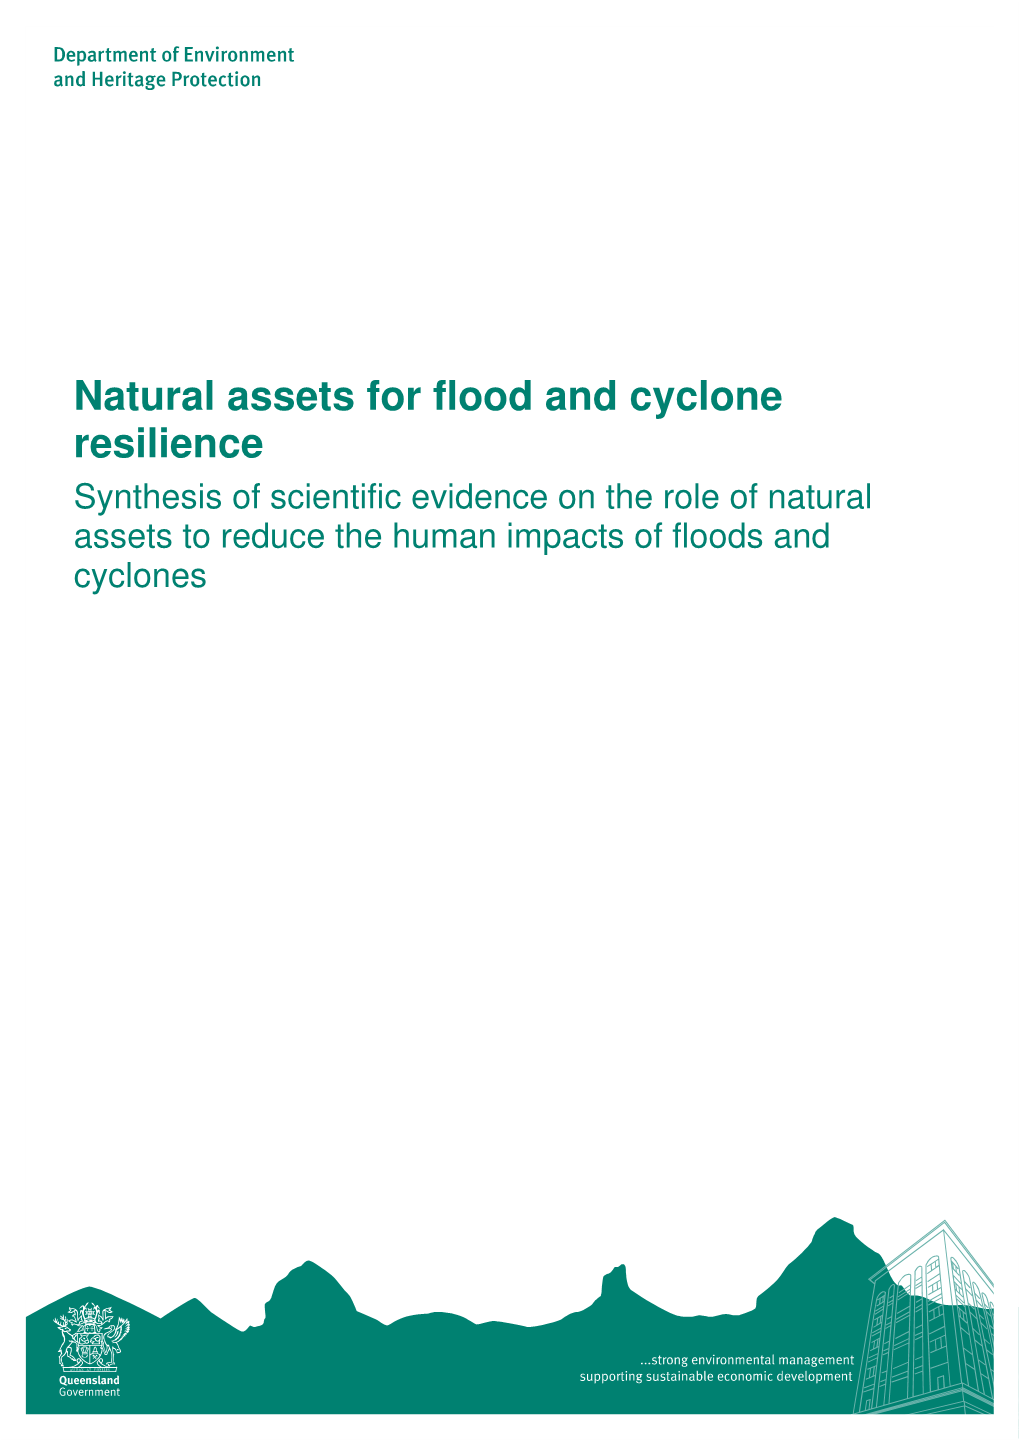 Natural Assets for Flood and Cyclone Resilience Synthesis of Scientific Evidence on the Role of Natural Assets to Reduce the Human Impacts of Floods and Cyclones